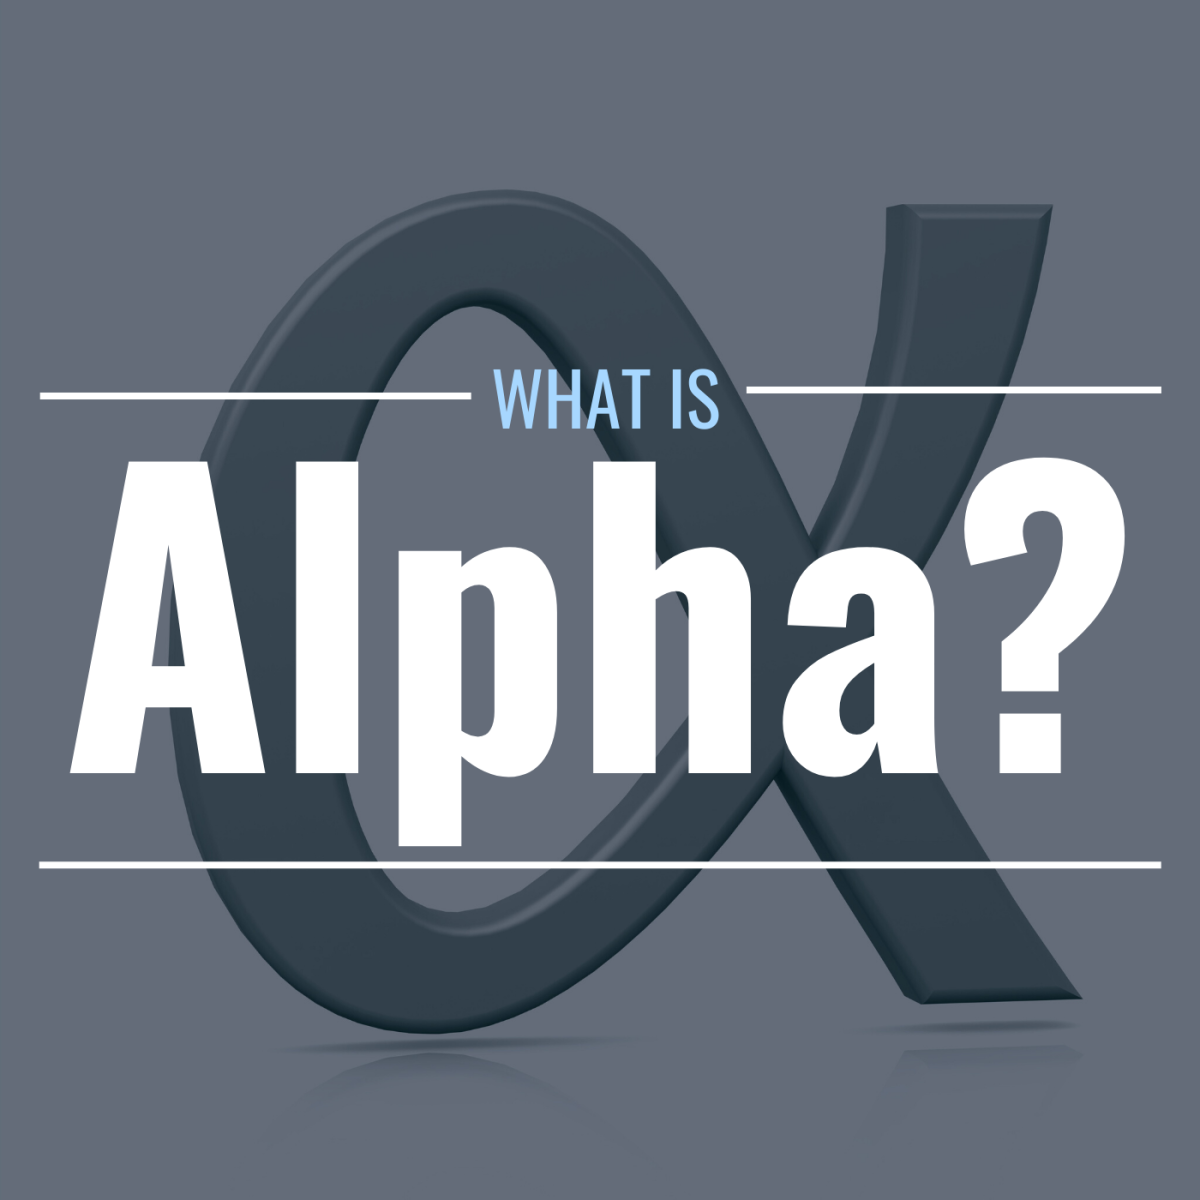 Image of the greek letter alpha with text overlay: "What Is Alpha?"